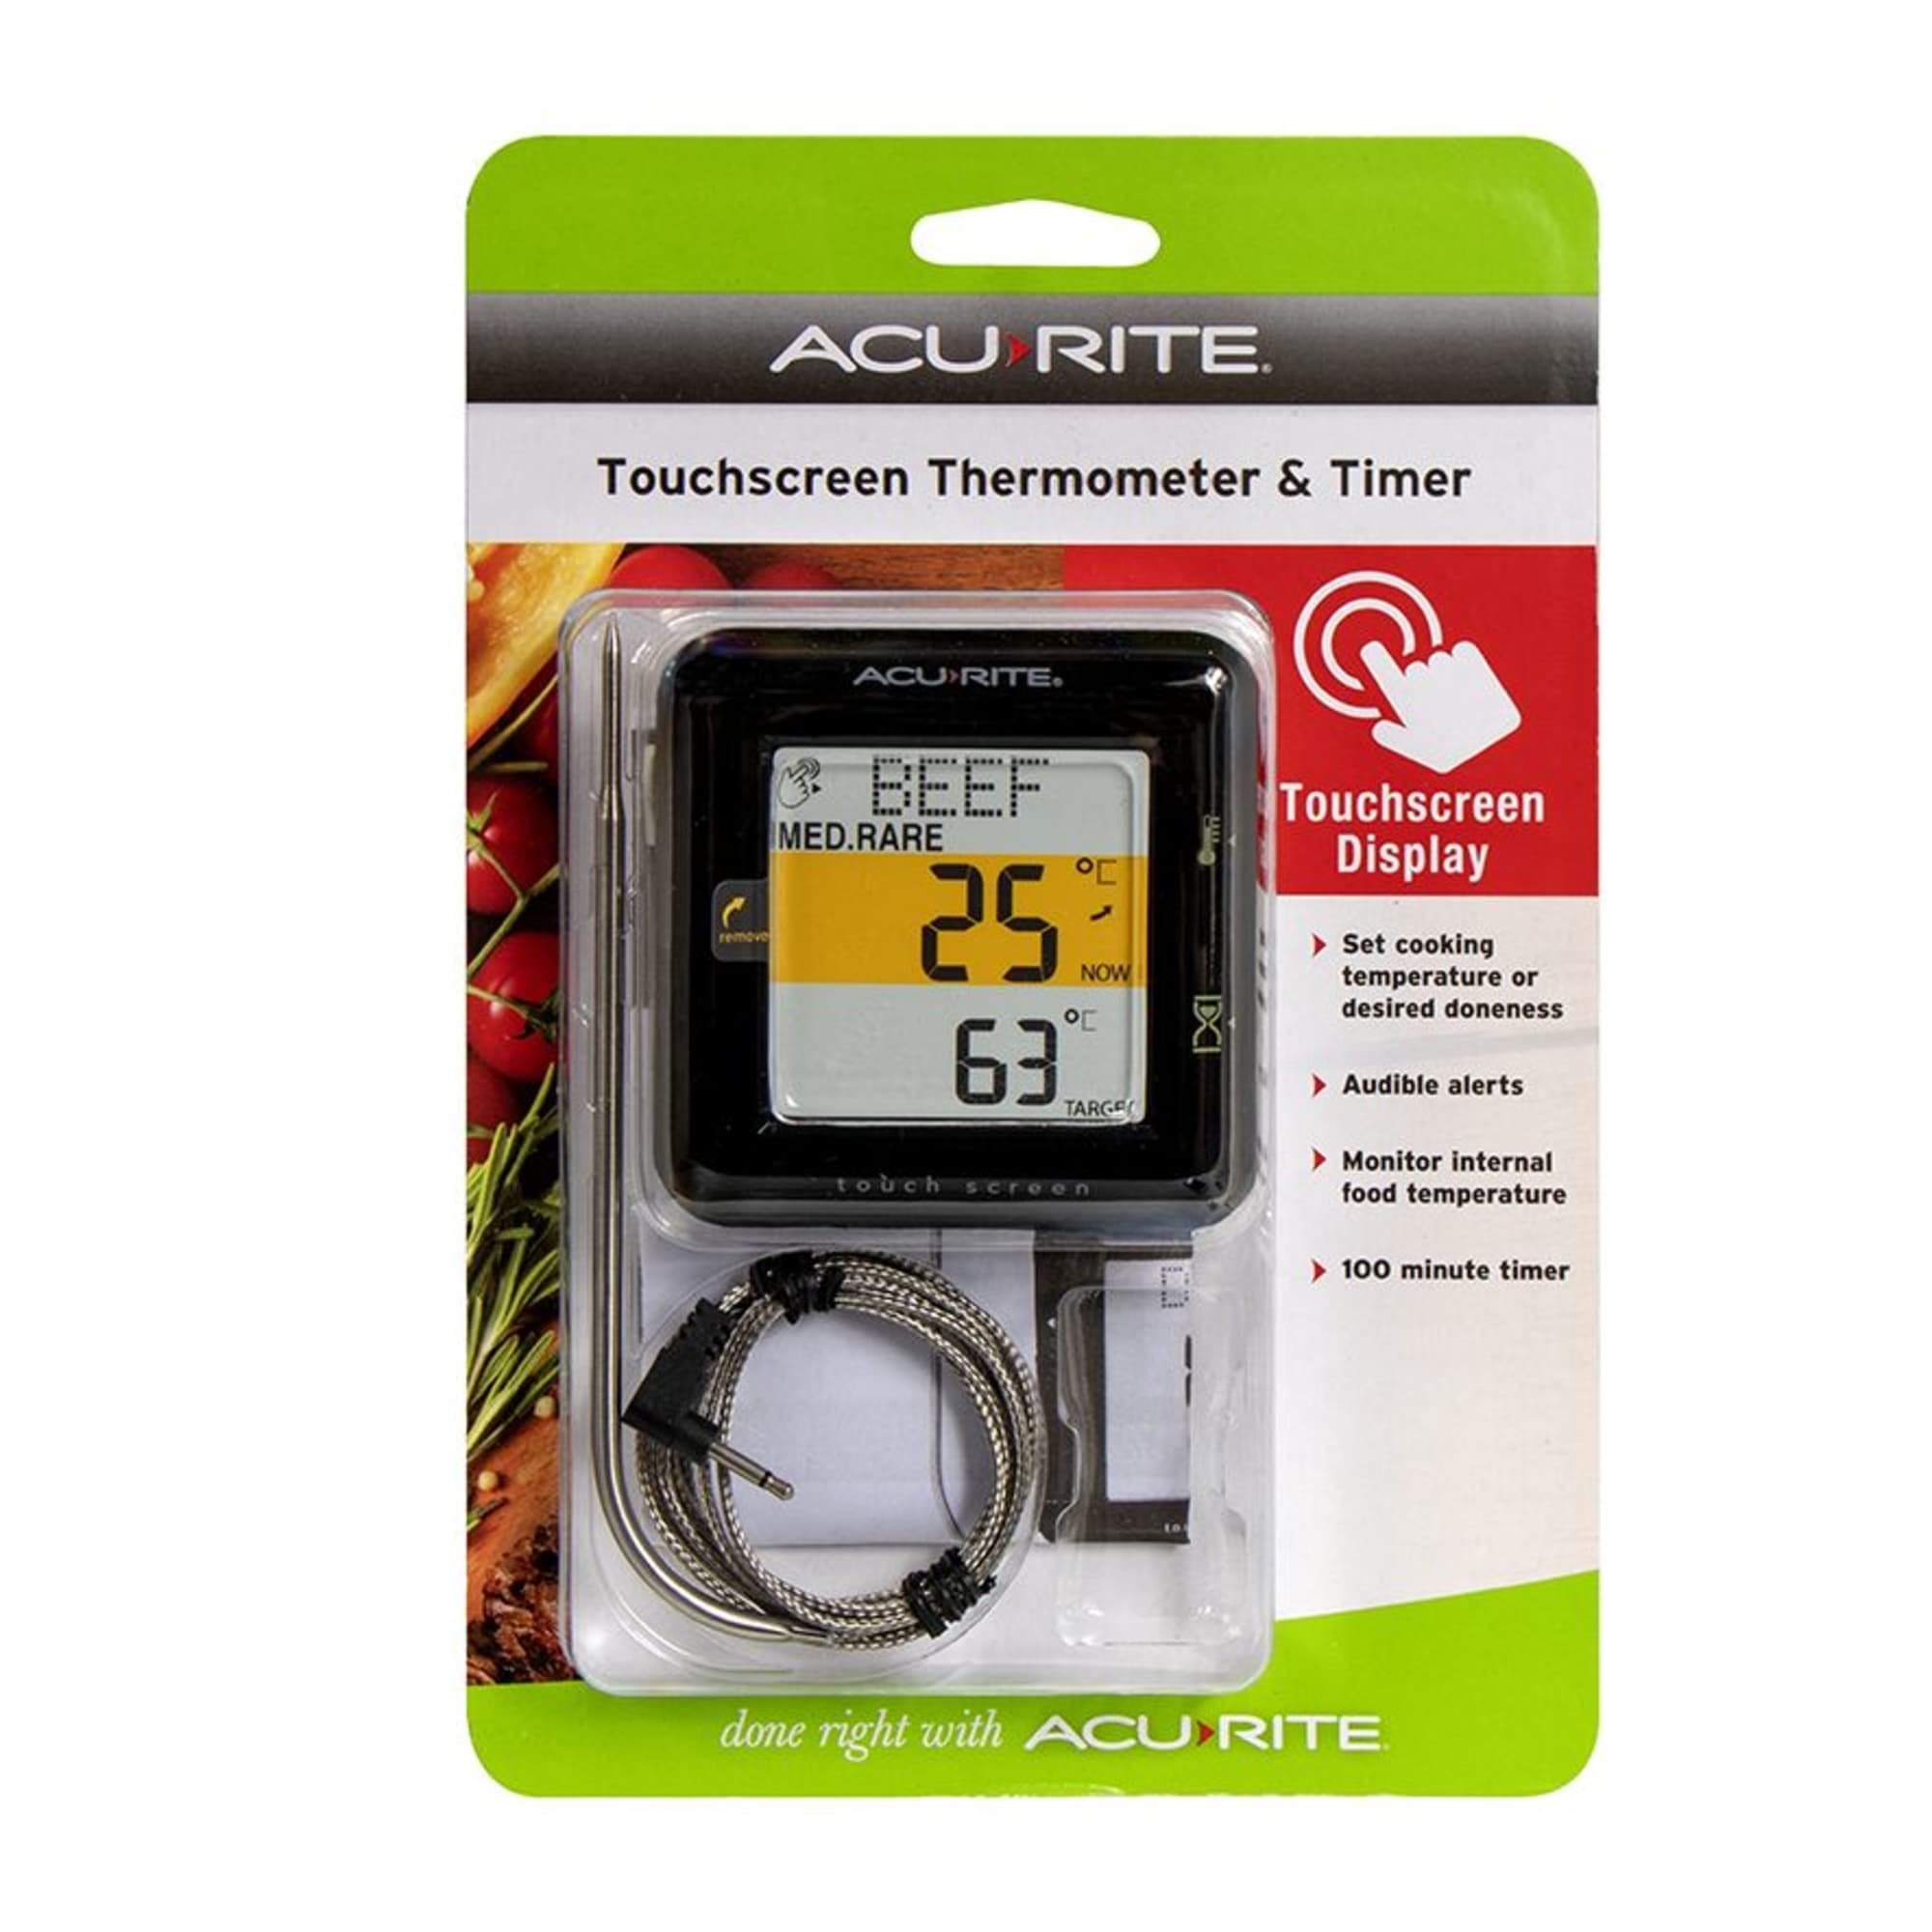 Acurite Touchscreen Thermometer & Timer Image 2